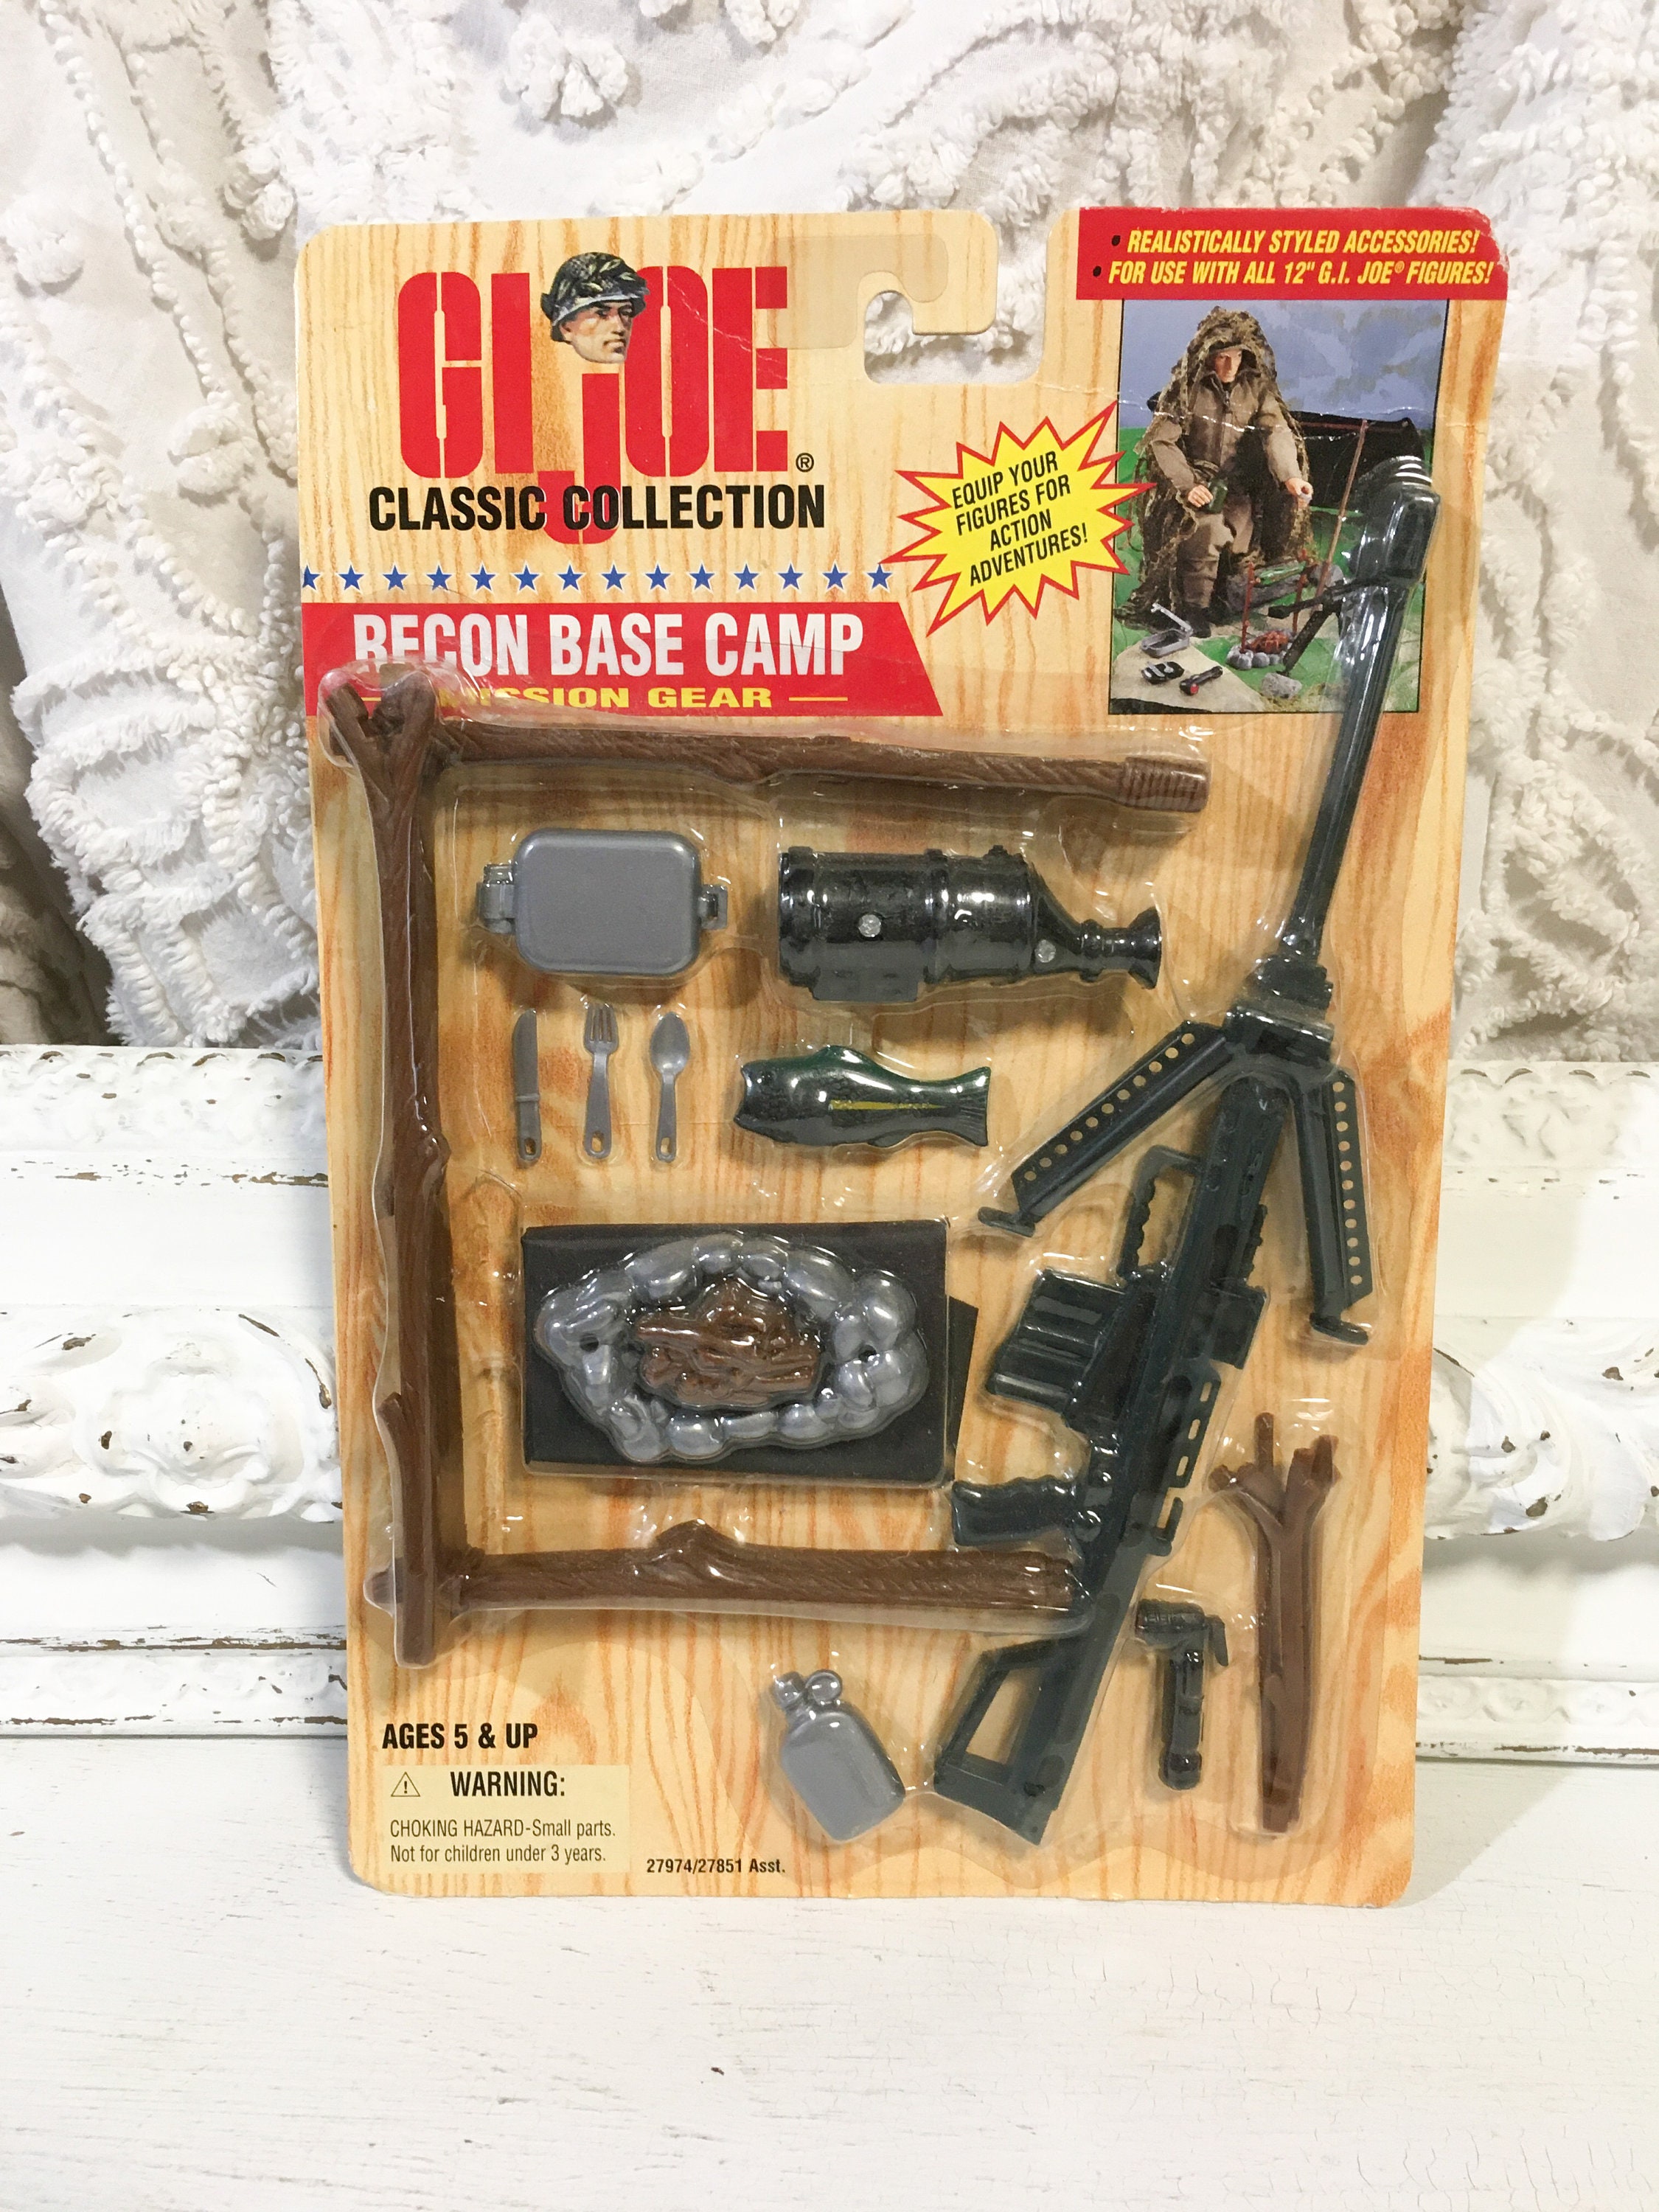 12” GI Joe Classic Collection Recon 13 Piece Base Camp Mission Gear 1997 